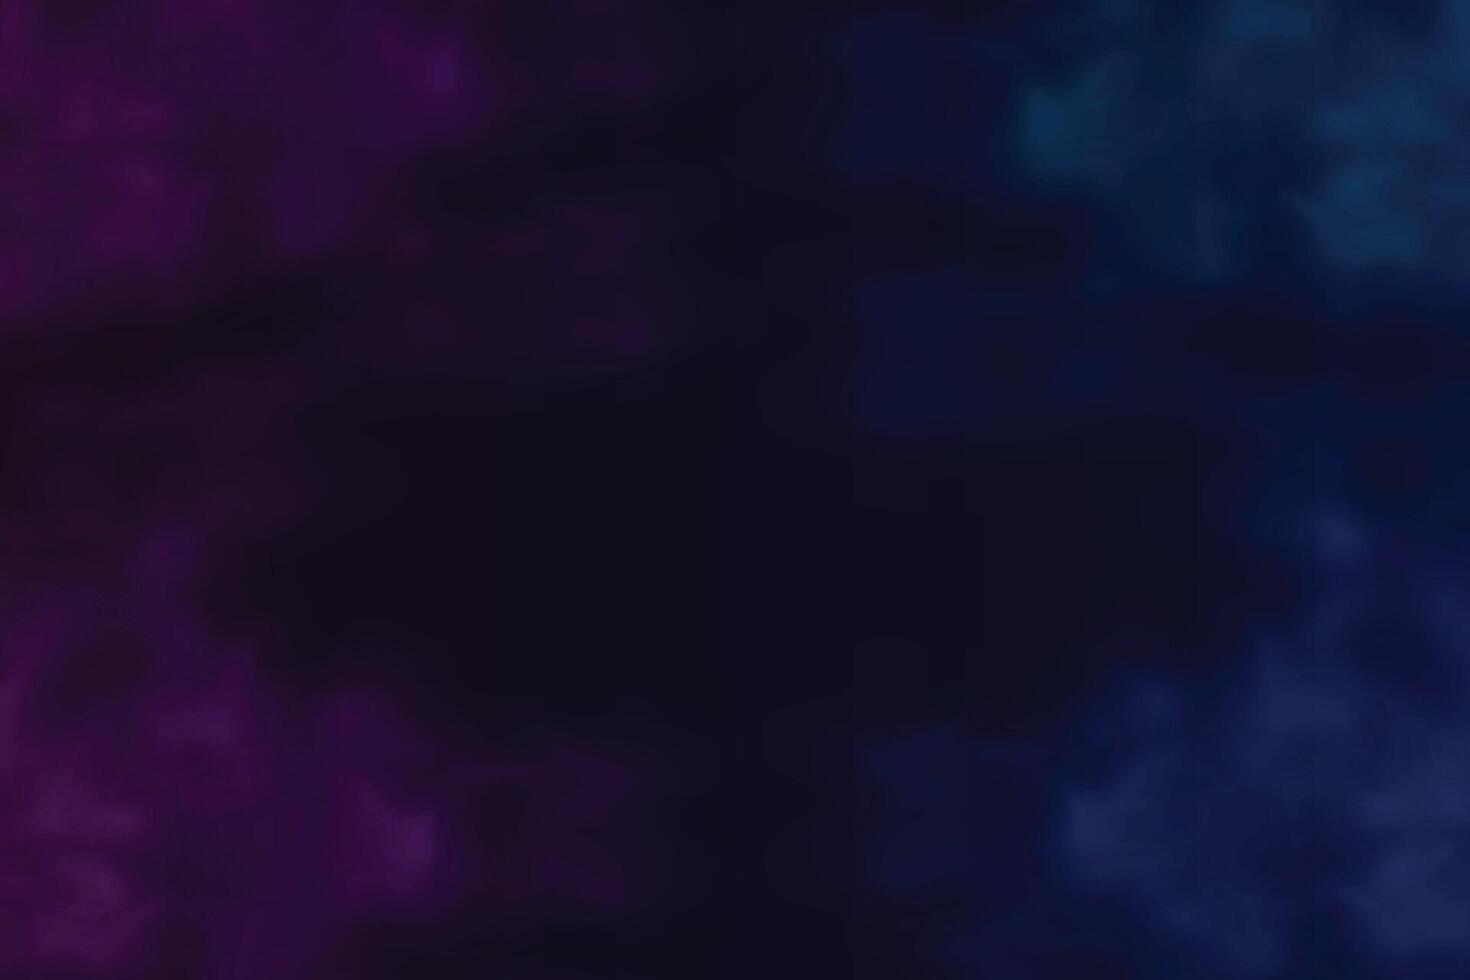 Blue and purple fog or smoke effect on dark background vector